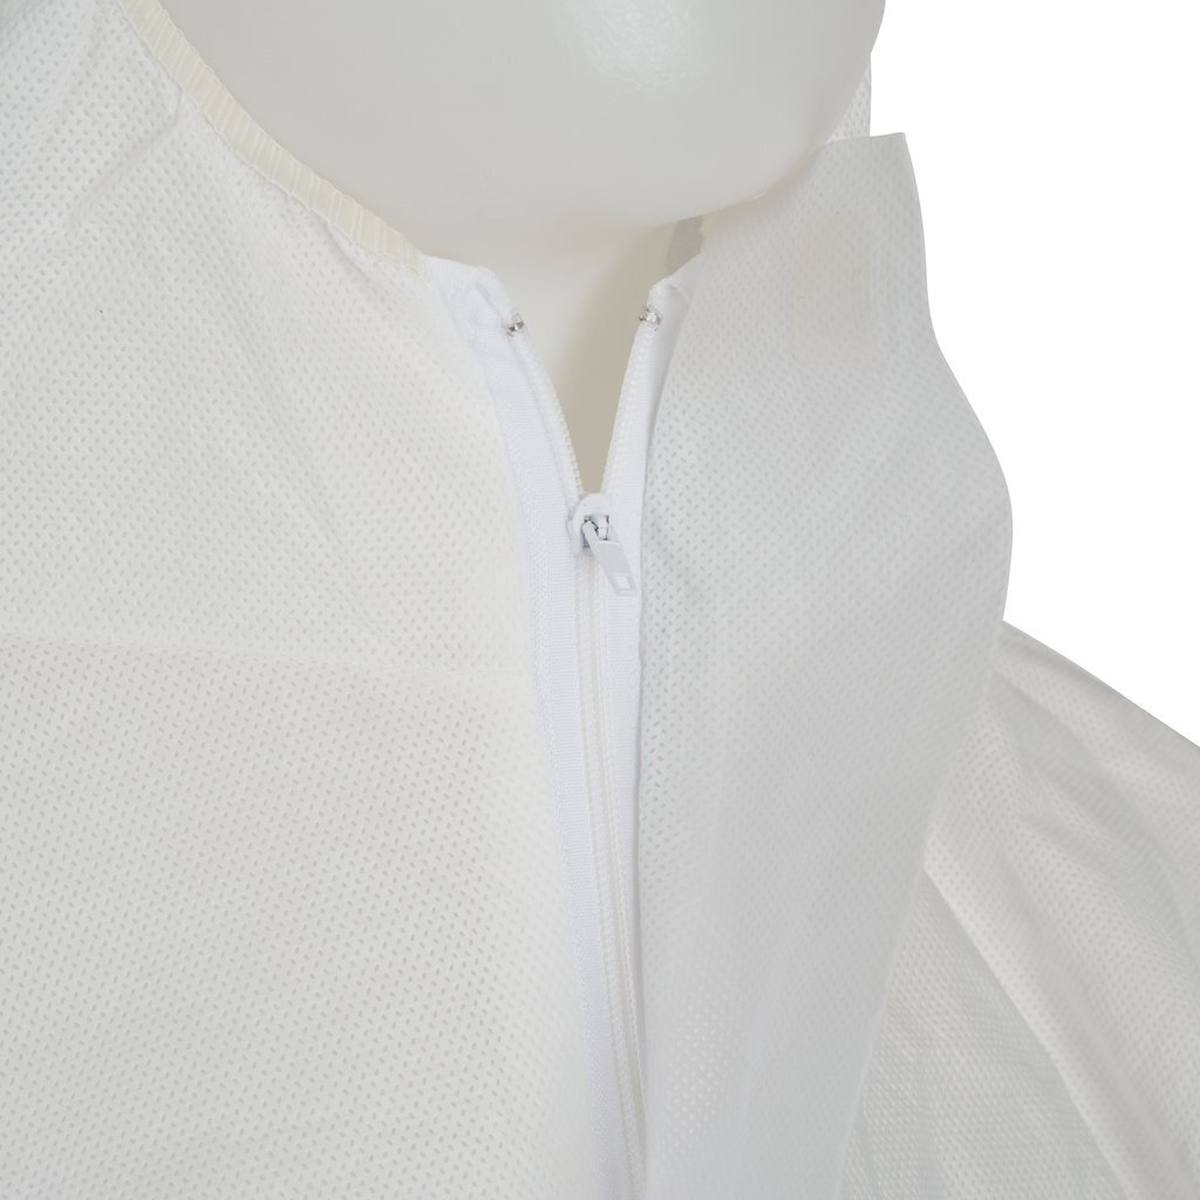 3M 4515W Protective suit, white, TYPE 5/6, size 4XL, material SMMS low-lint, elasticated cuffs